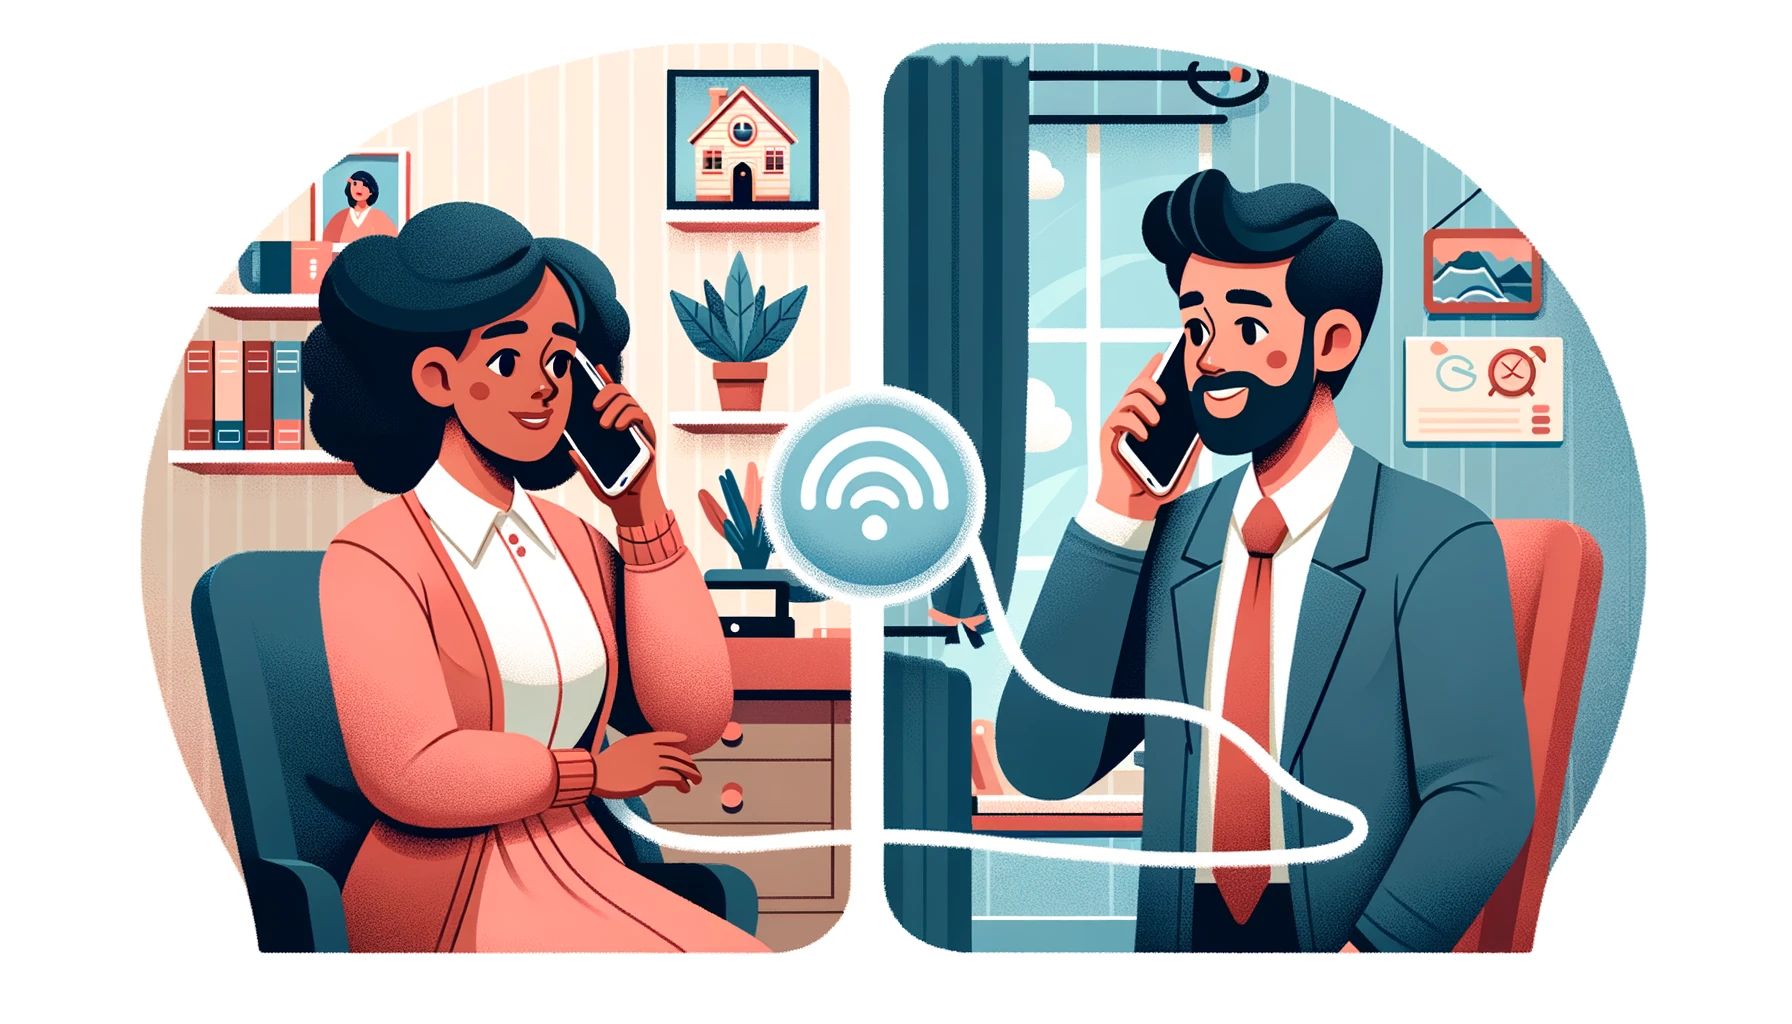 Illustration of a split scene where on one side, a parent, a woman of African descent, is speaking on a phone in her home setting, and on the other side, a teacher, a man of Hispanic descent, is taking the call in a classroom. Between them, there's a transparent wave of communication, symbolizing the connection.